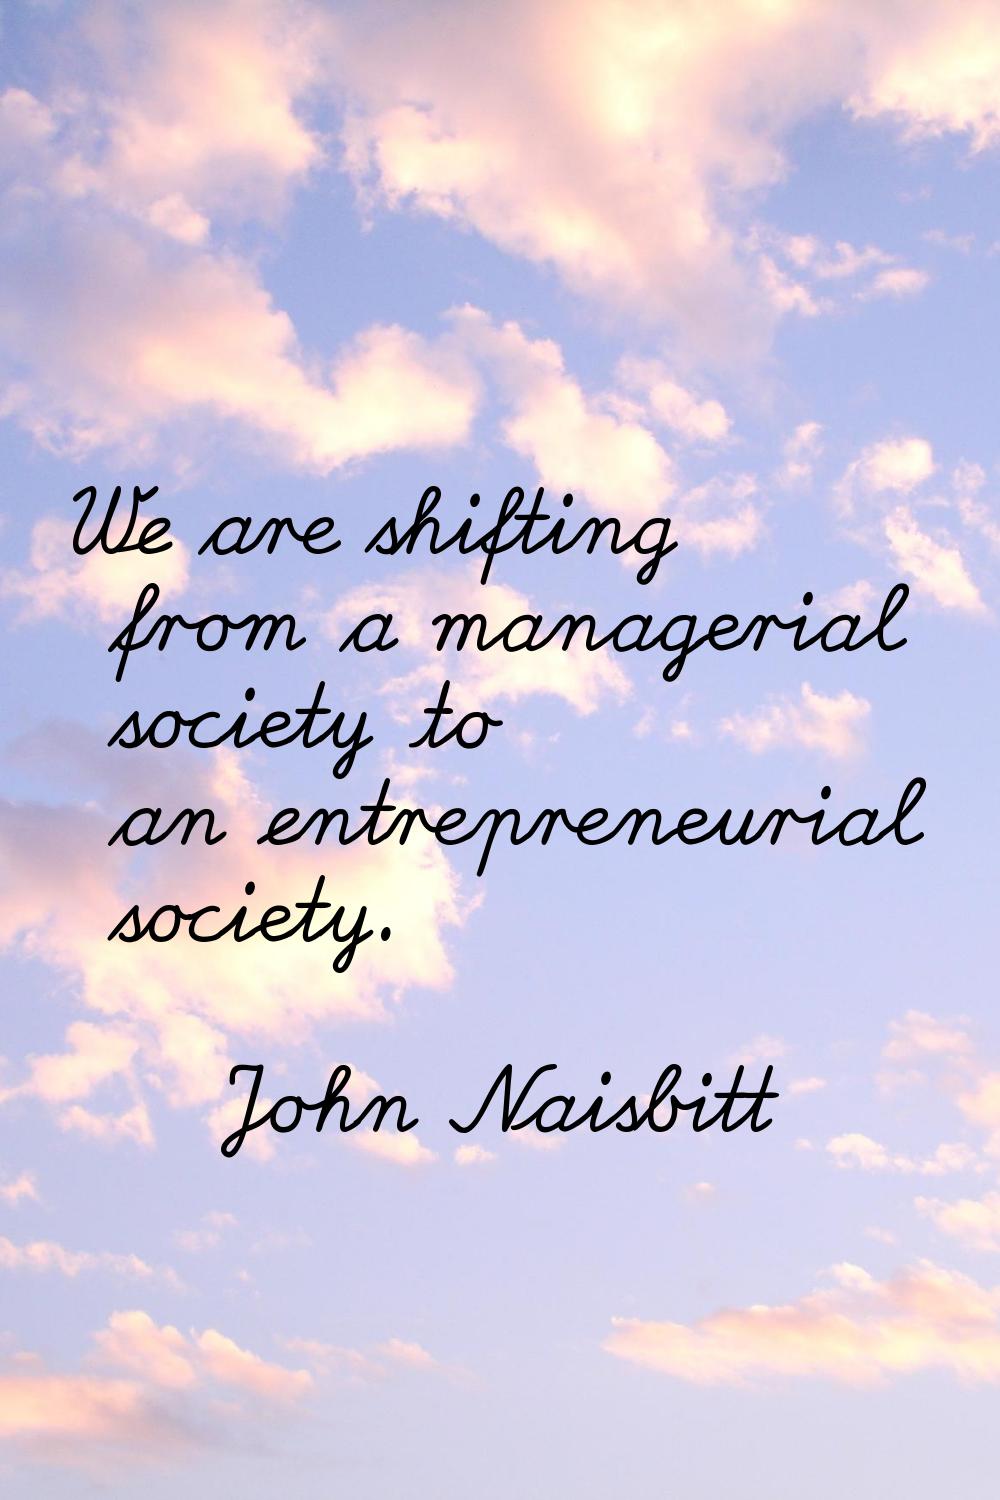 We are shifting from a managerial society to an entrepreneurial society.